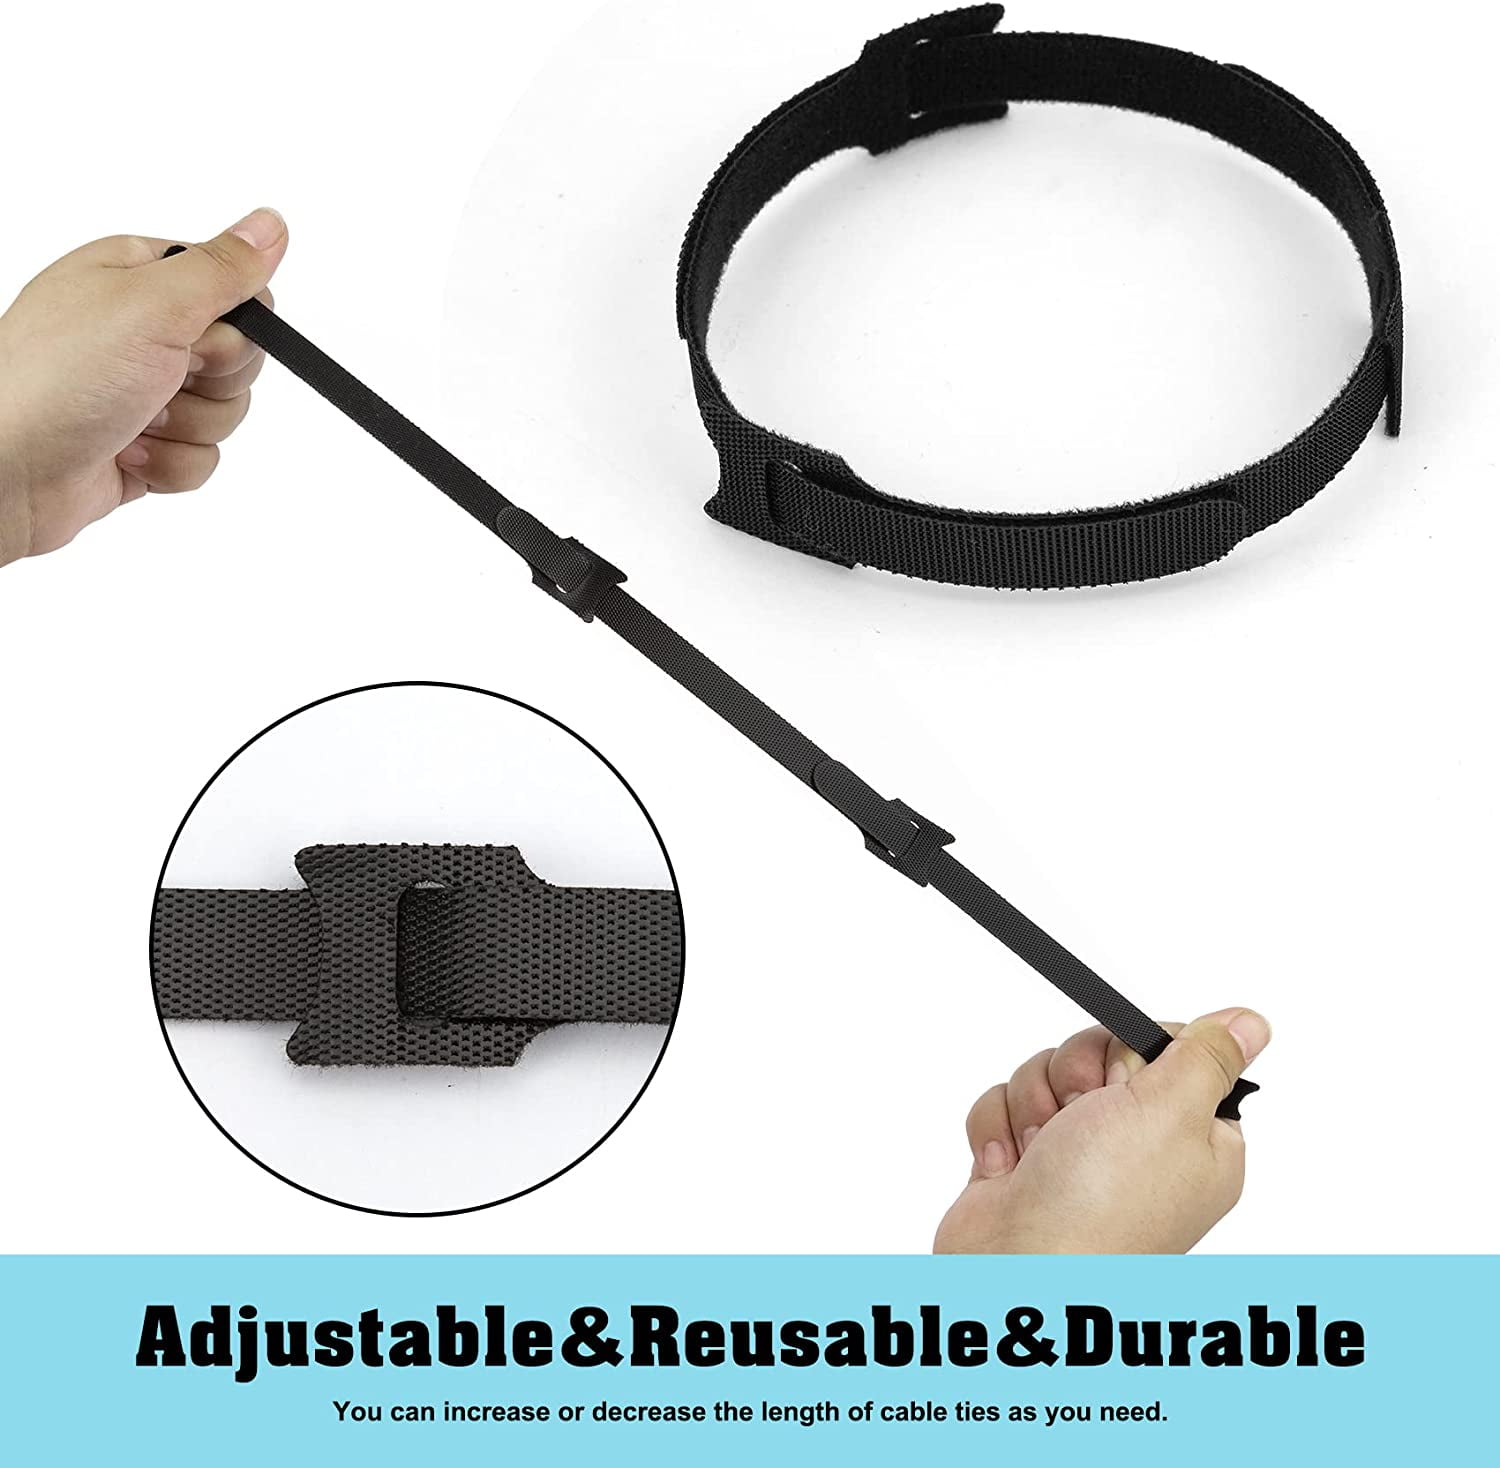 80PCS Reusable Cable Ties, Black Adjustable 6-Inch Cord Organizer Ties,  Multi-purpose Hook Loop Cable Management Wire Ties for Organizing Home,  Office, Data Centers 